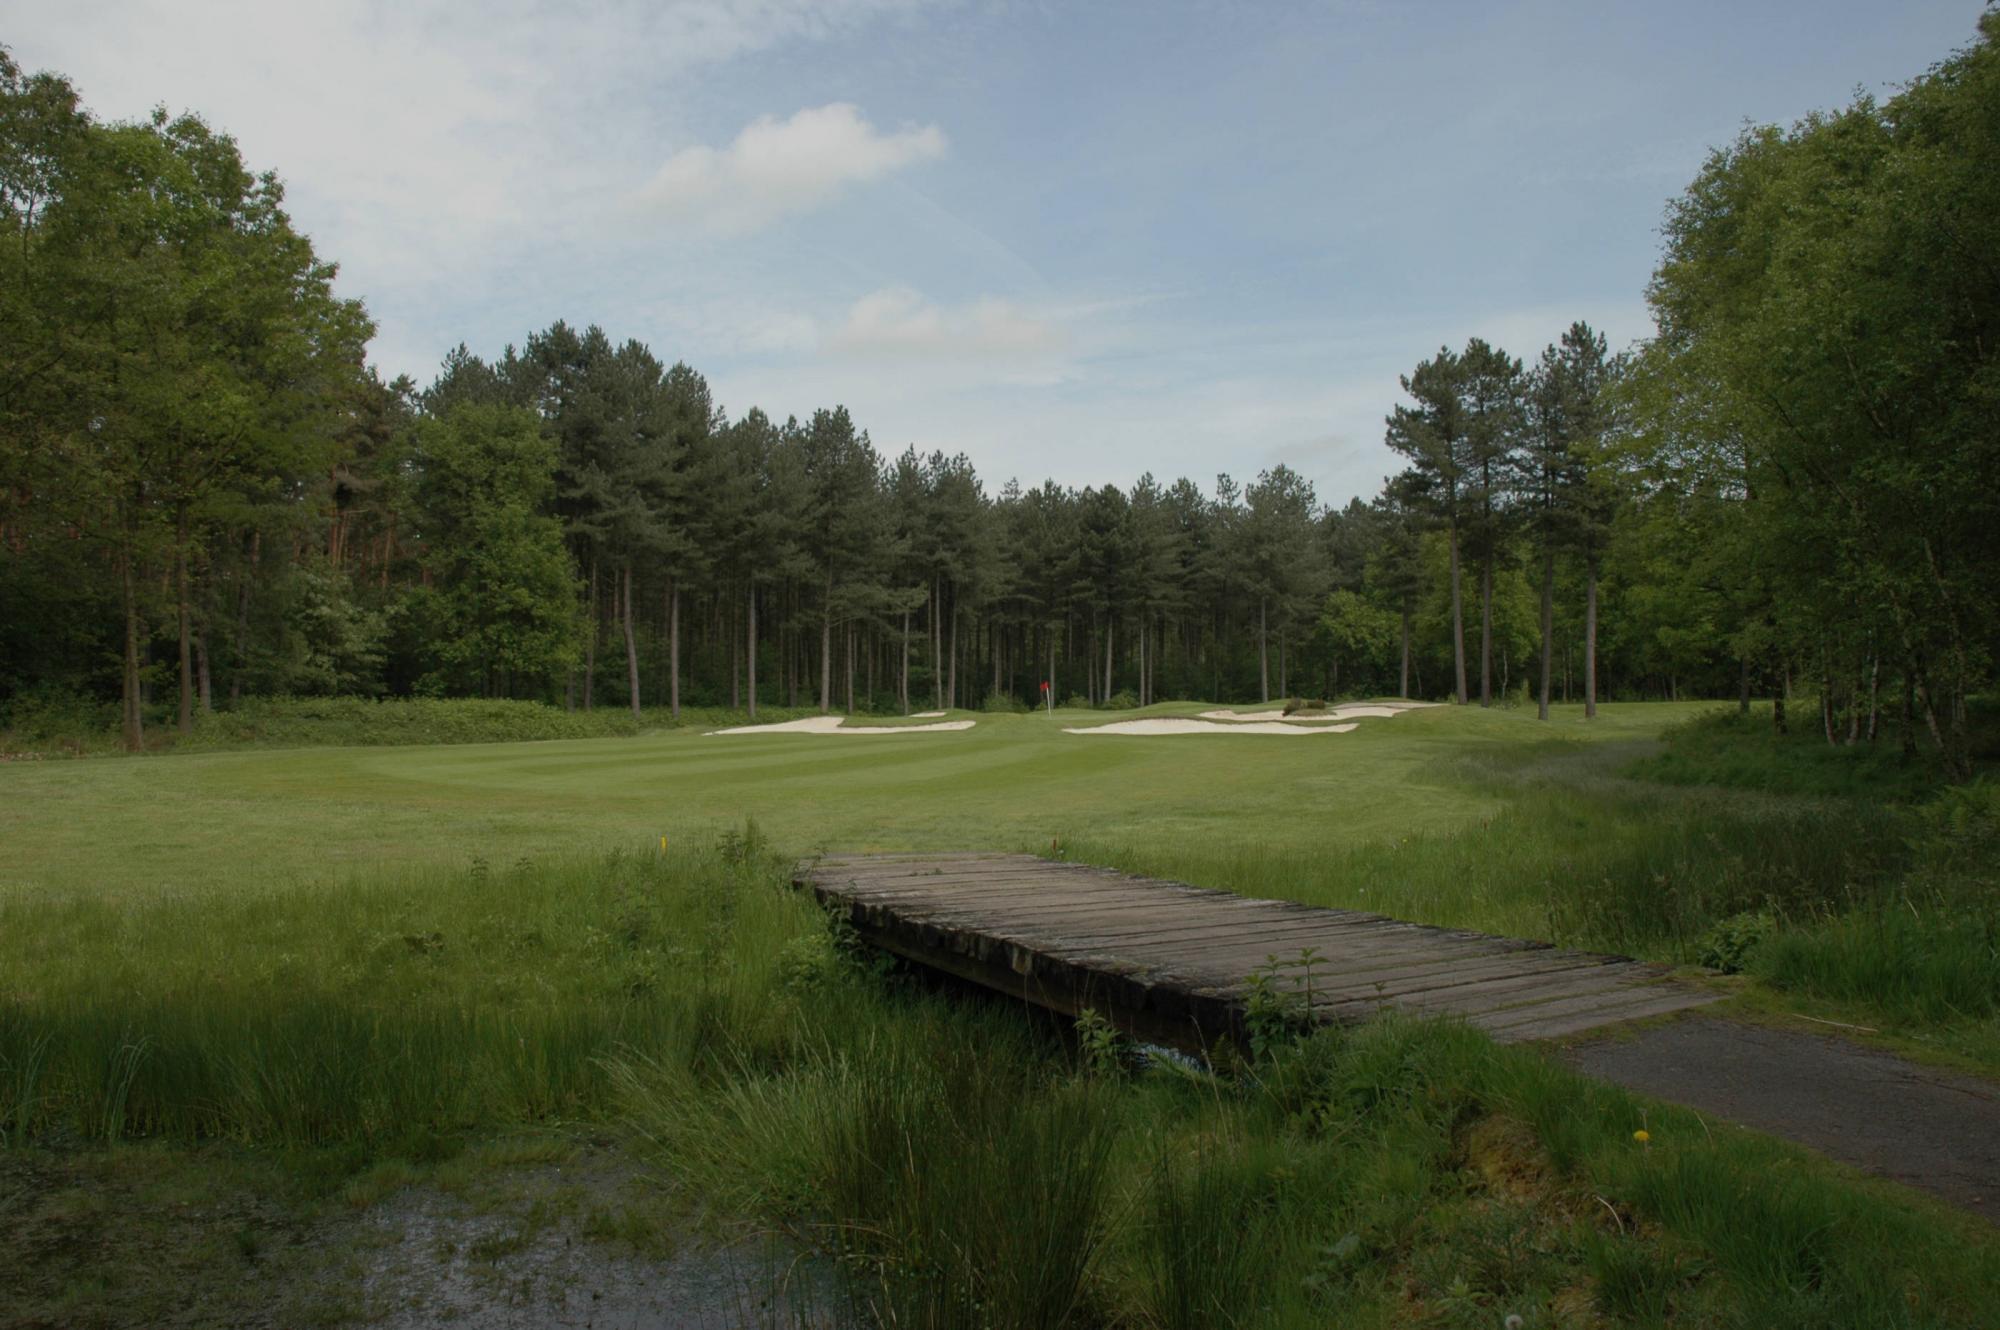 Royal Golf Club du Hainaut has several of the most popular golf course near Brussels Waterloo & Mons